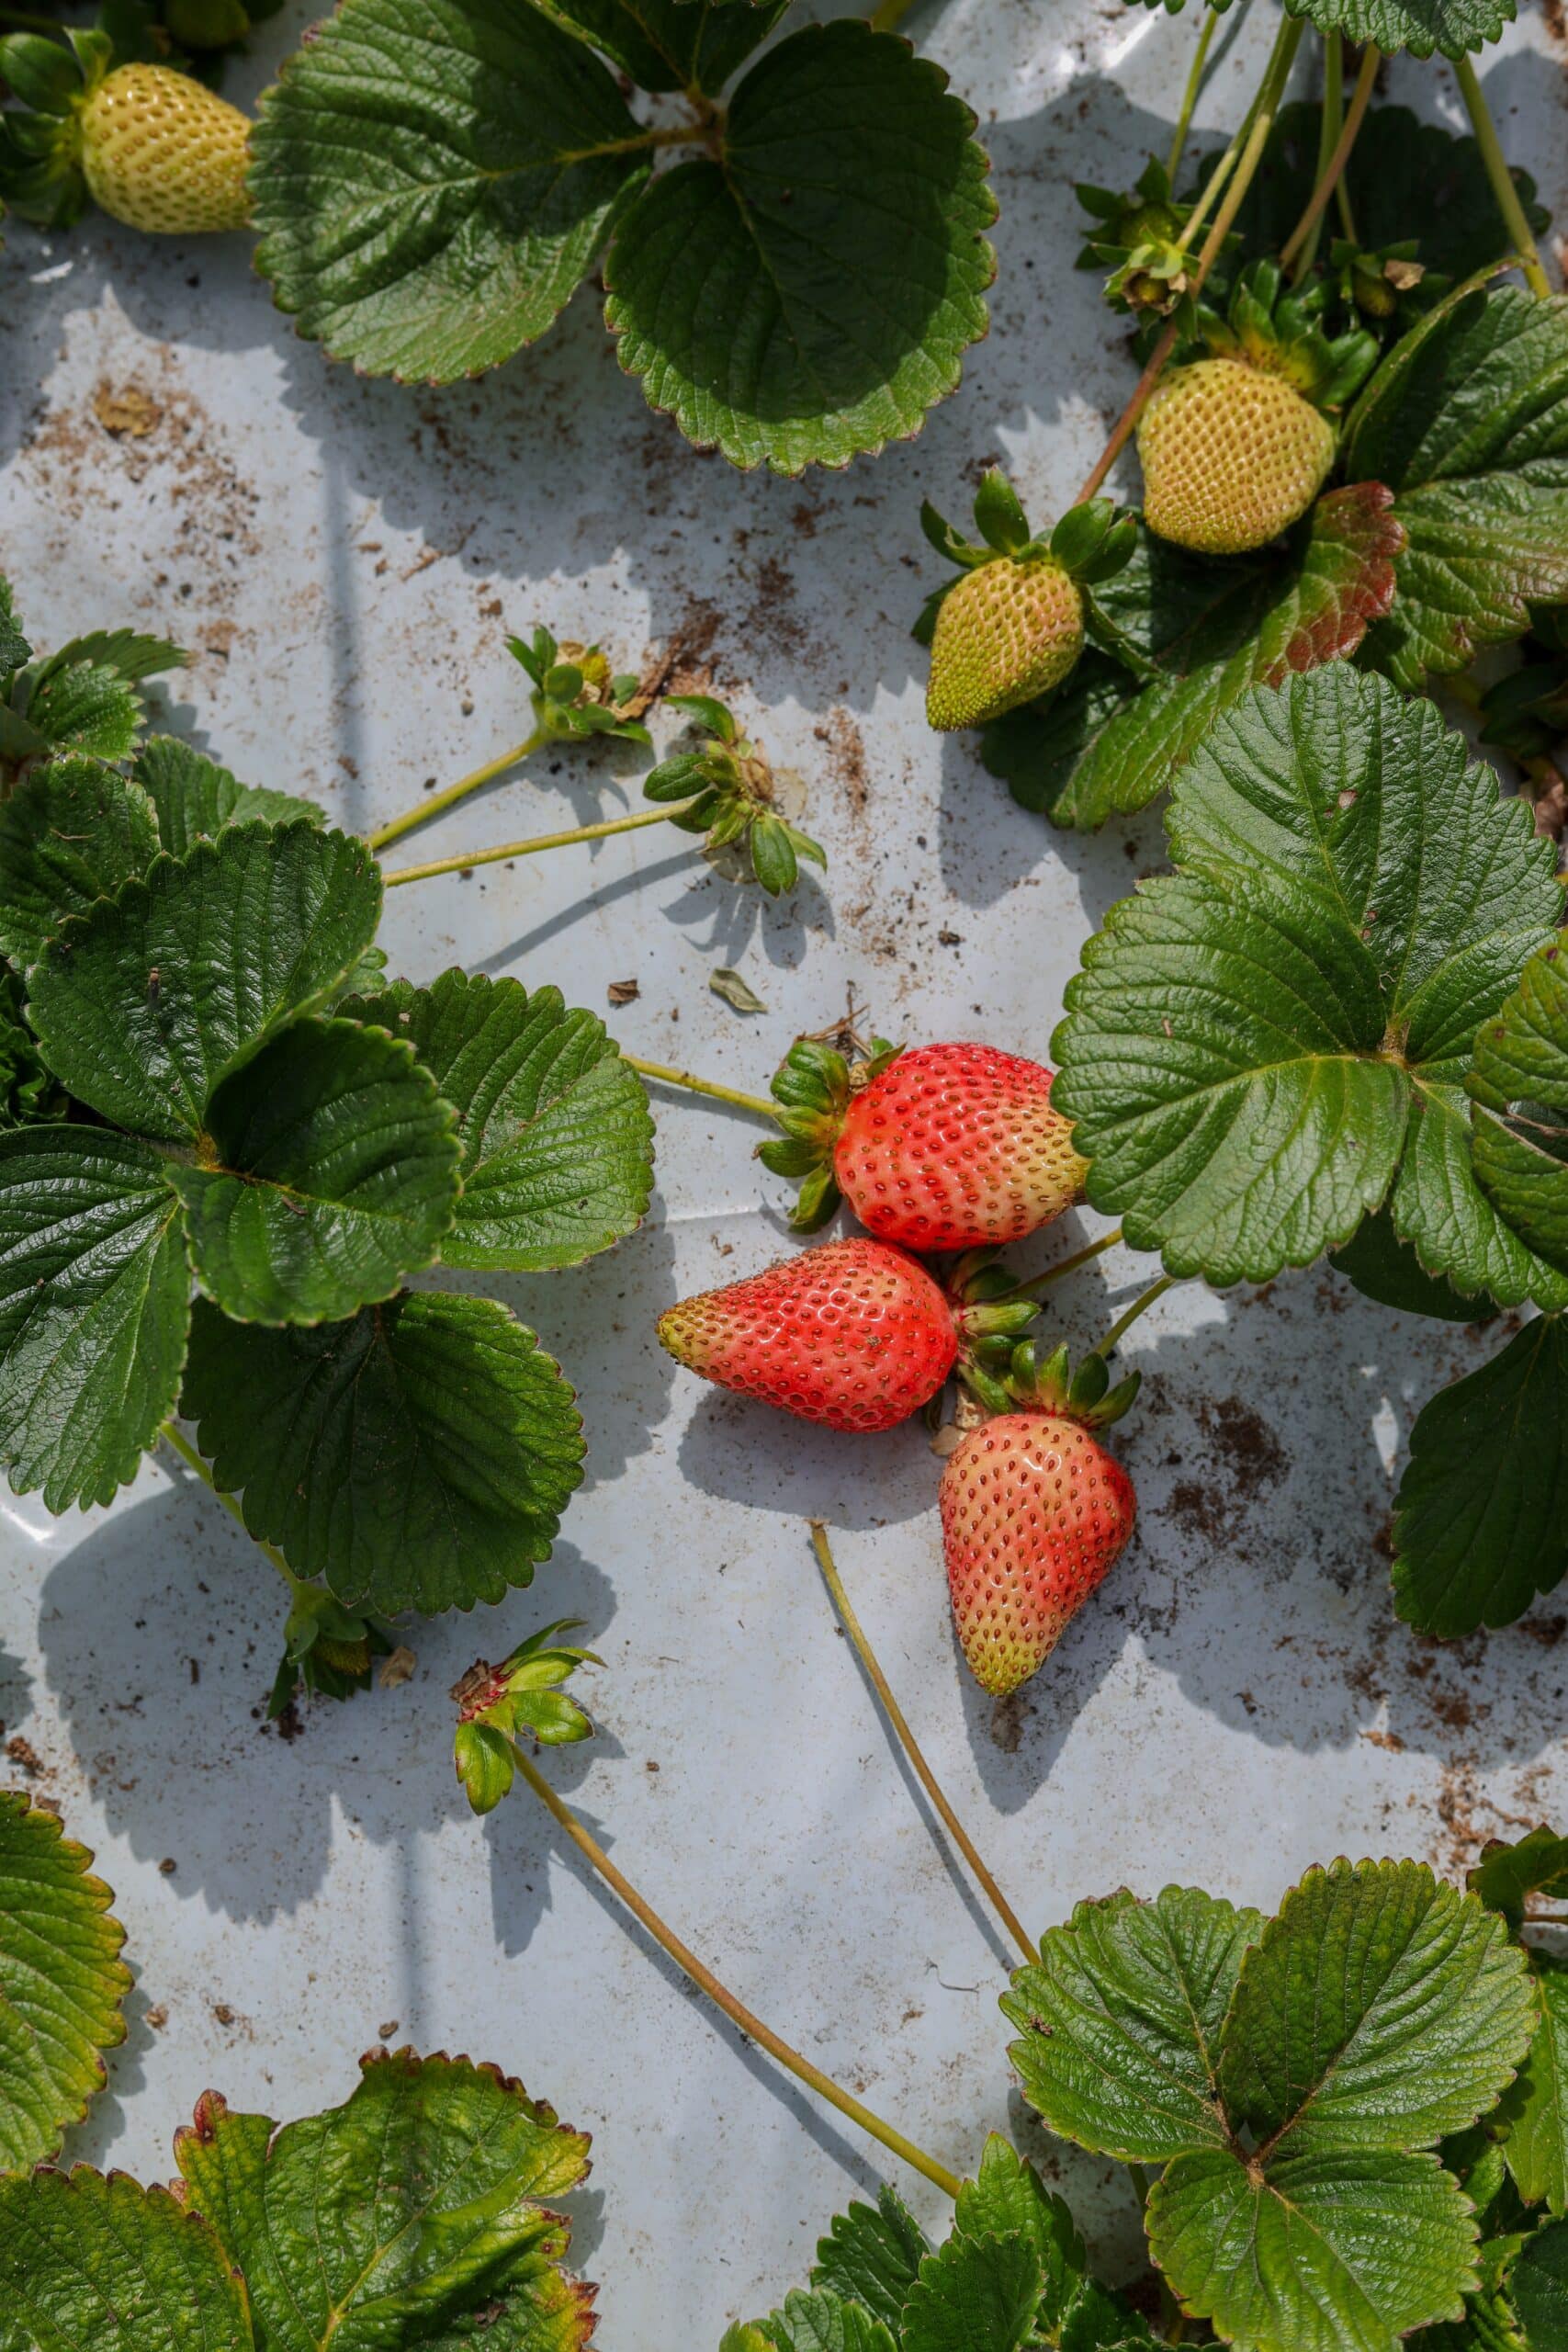 grow strawberries in planters